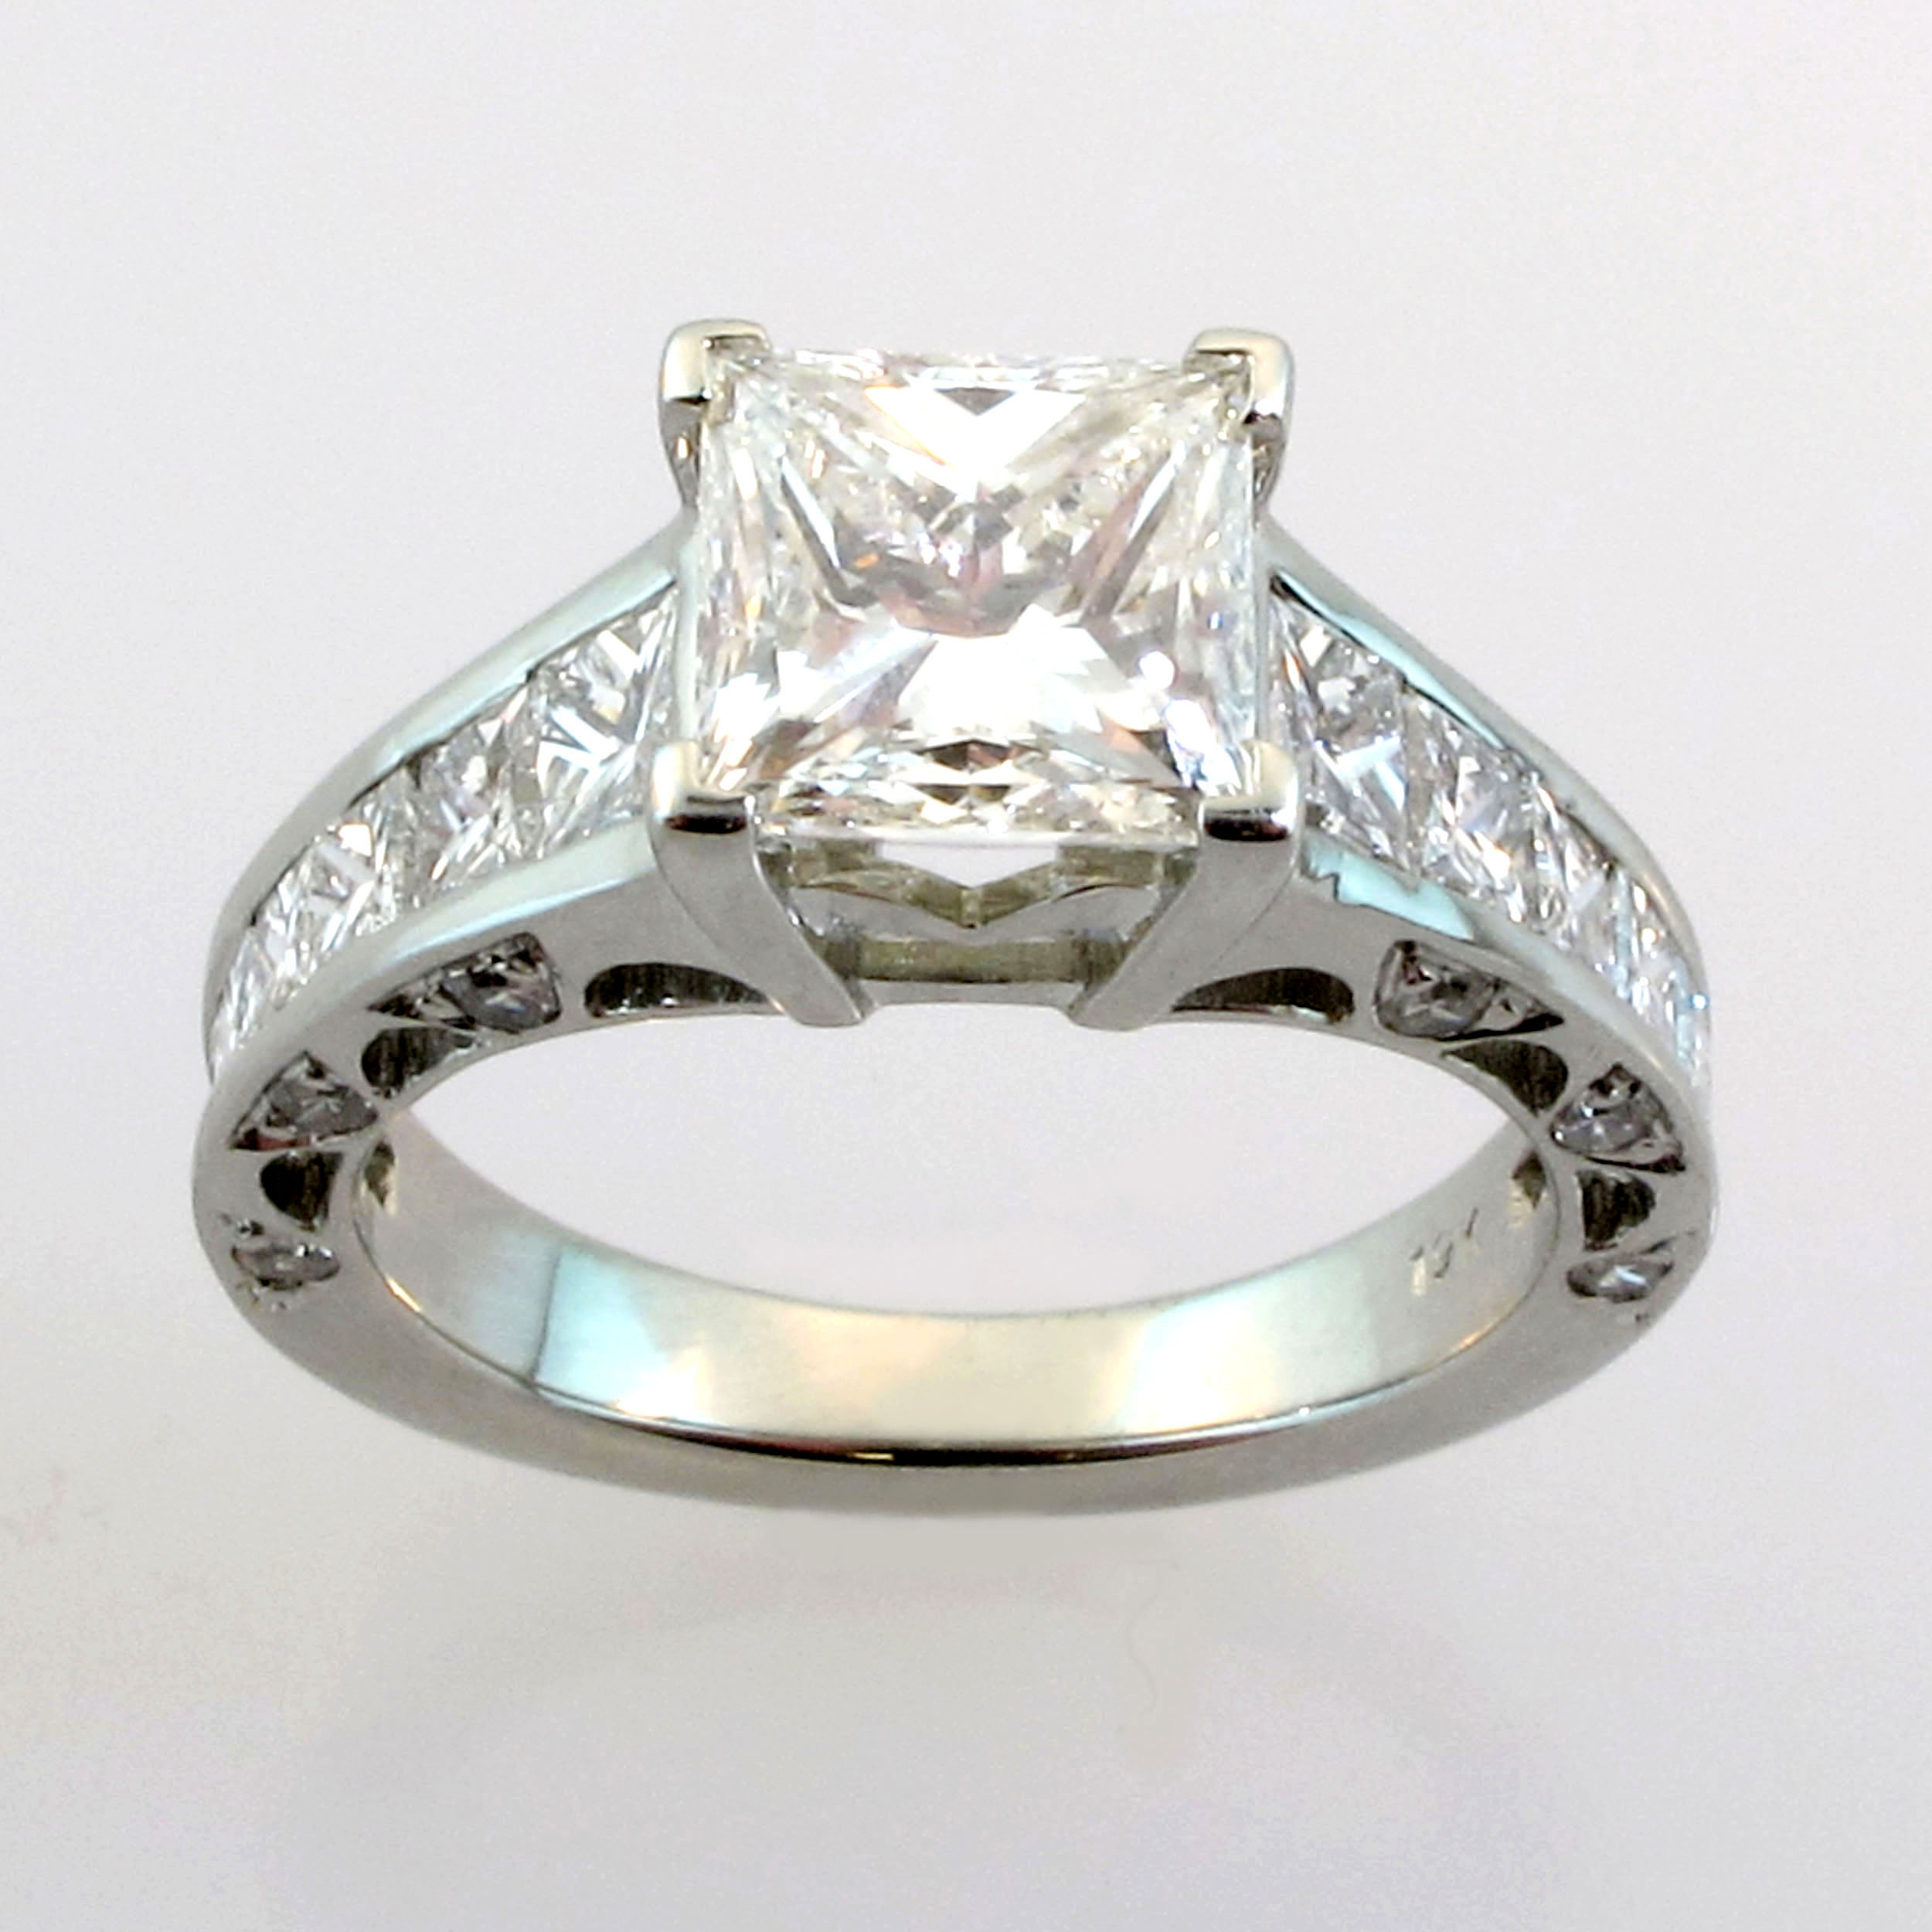 Engagement ring with wide band 4-prong channel set princess cut with side diamonds